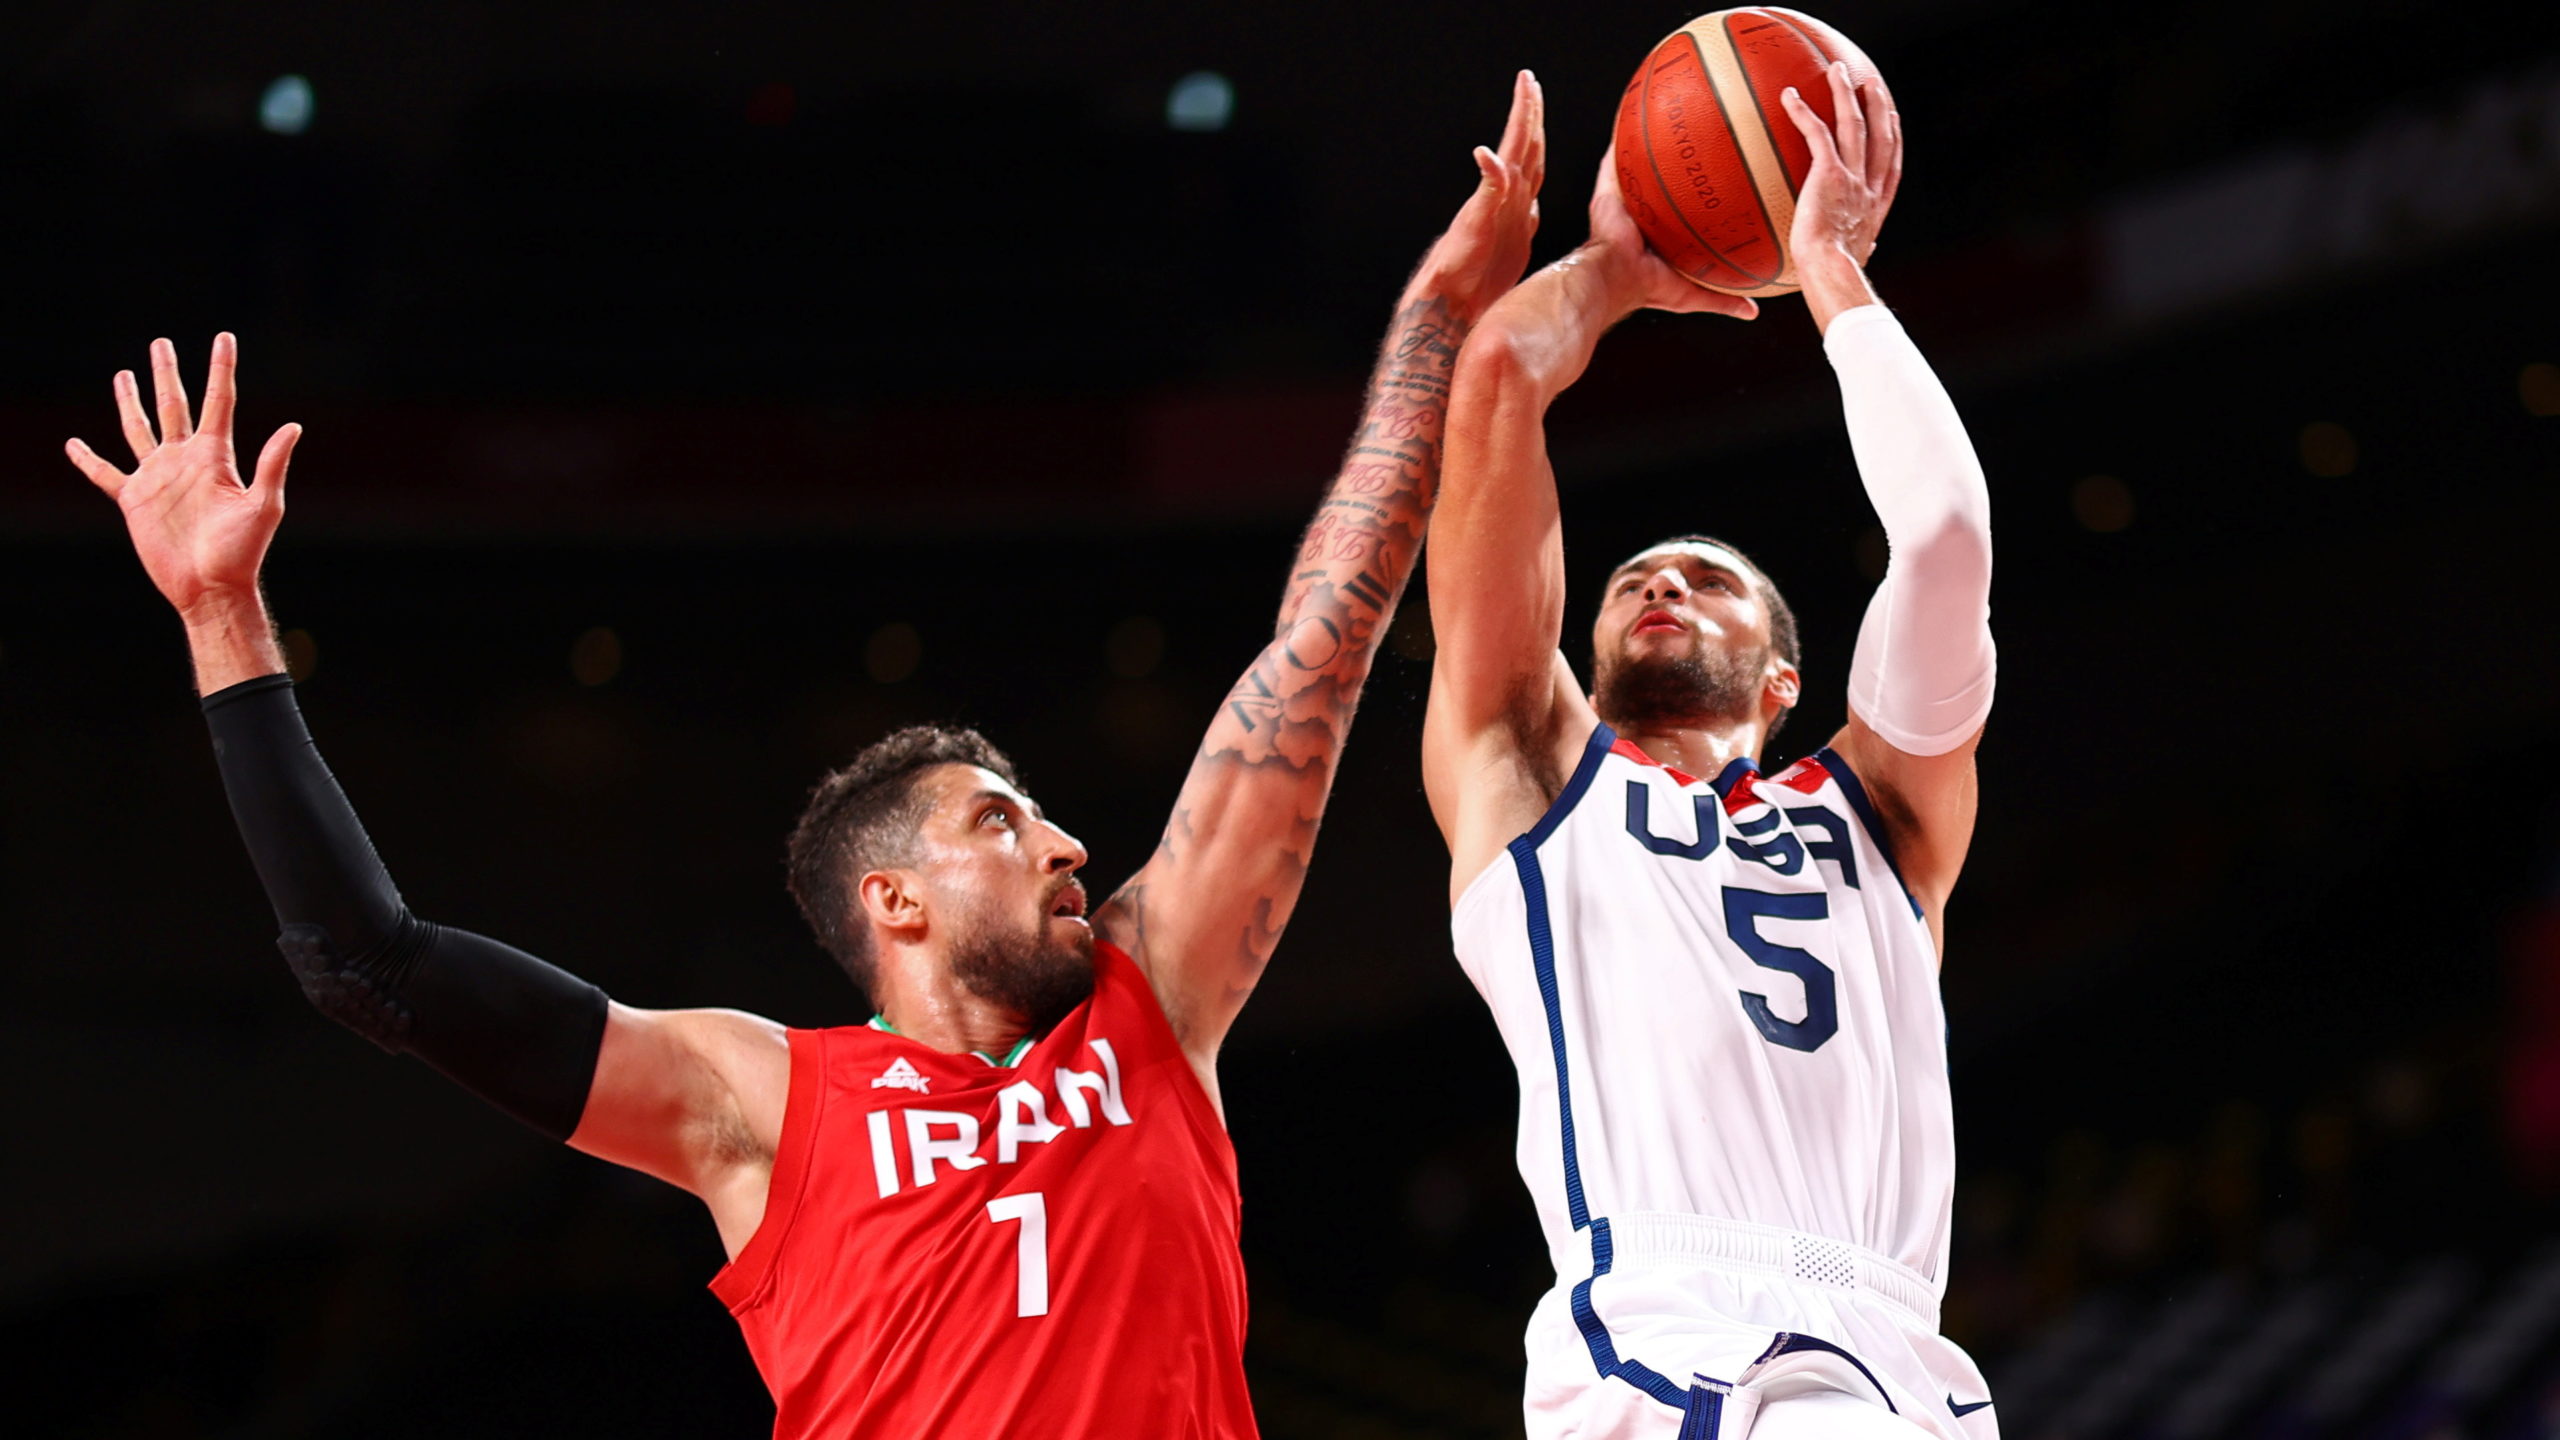 Tokyo 2020 Olympics - Basketball - Men - Group A - United States v Iran - Saitama Super Arena, Saitama, Japan - July 28, 2021. Zach Lavine of the United States in action with Mohammad Hassanzadeh of Iran 